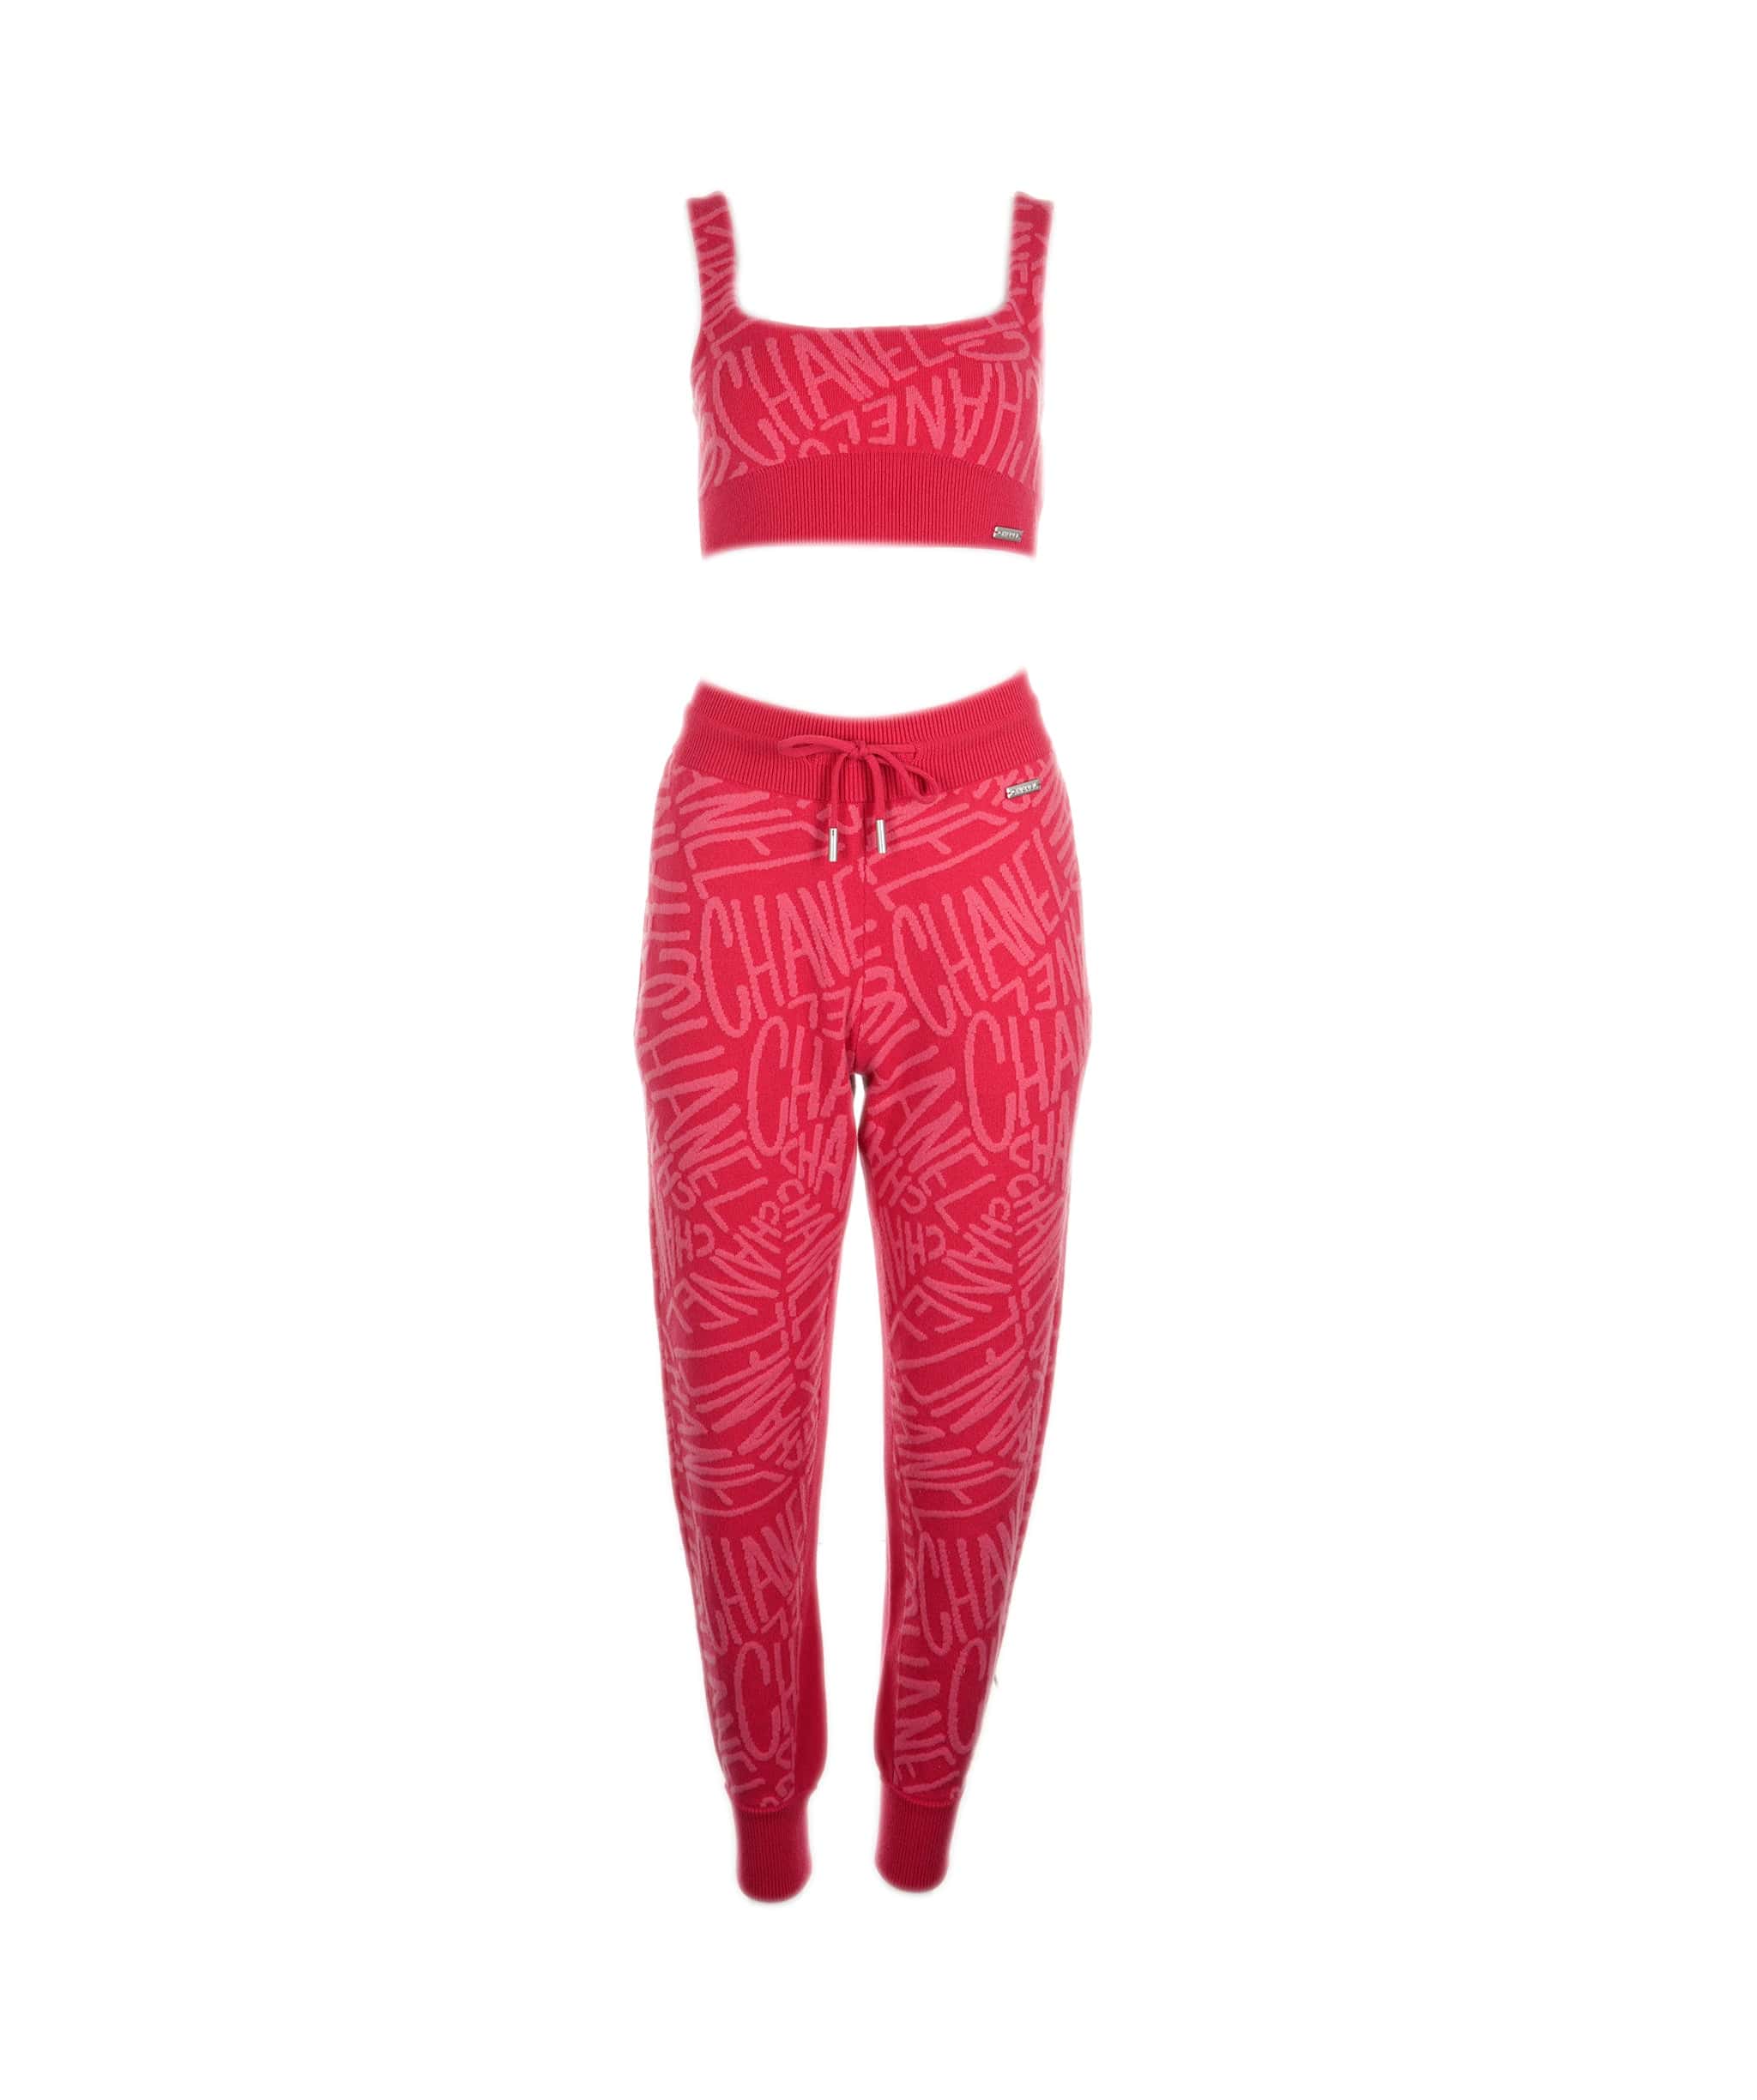 Chanel Chanel Set cachemere red and pink Jogging FR36  and Top FR38 AVC1325